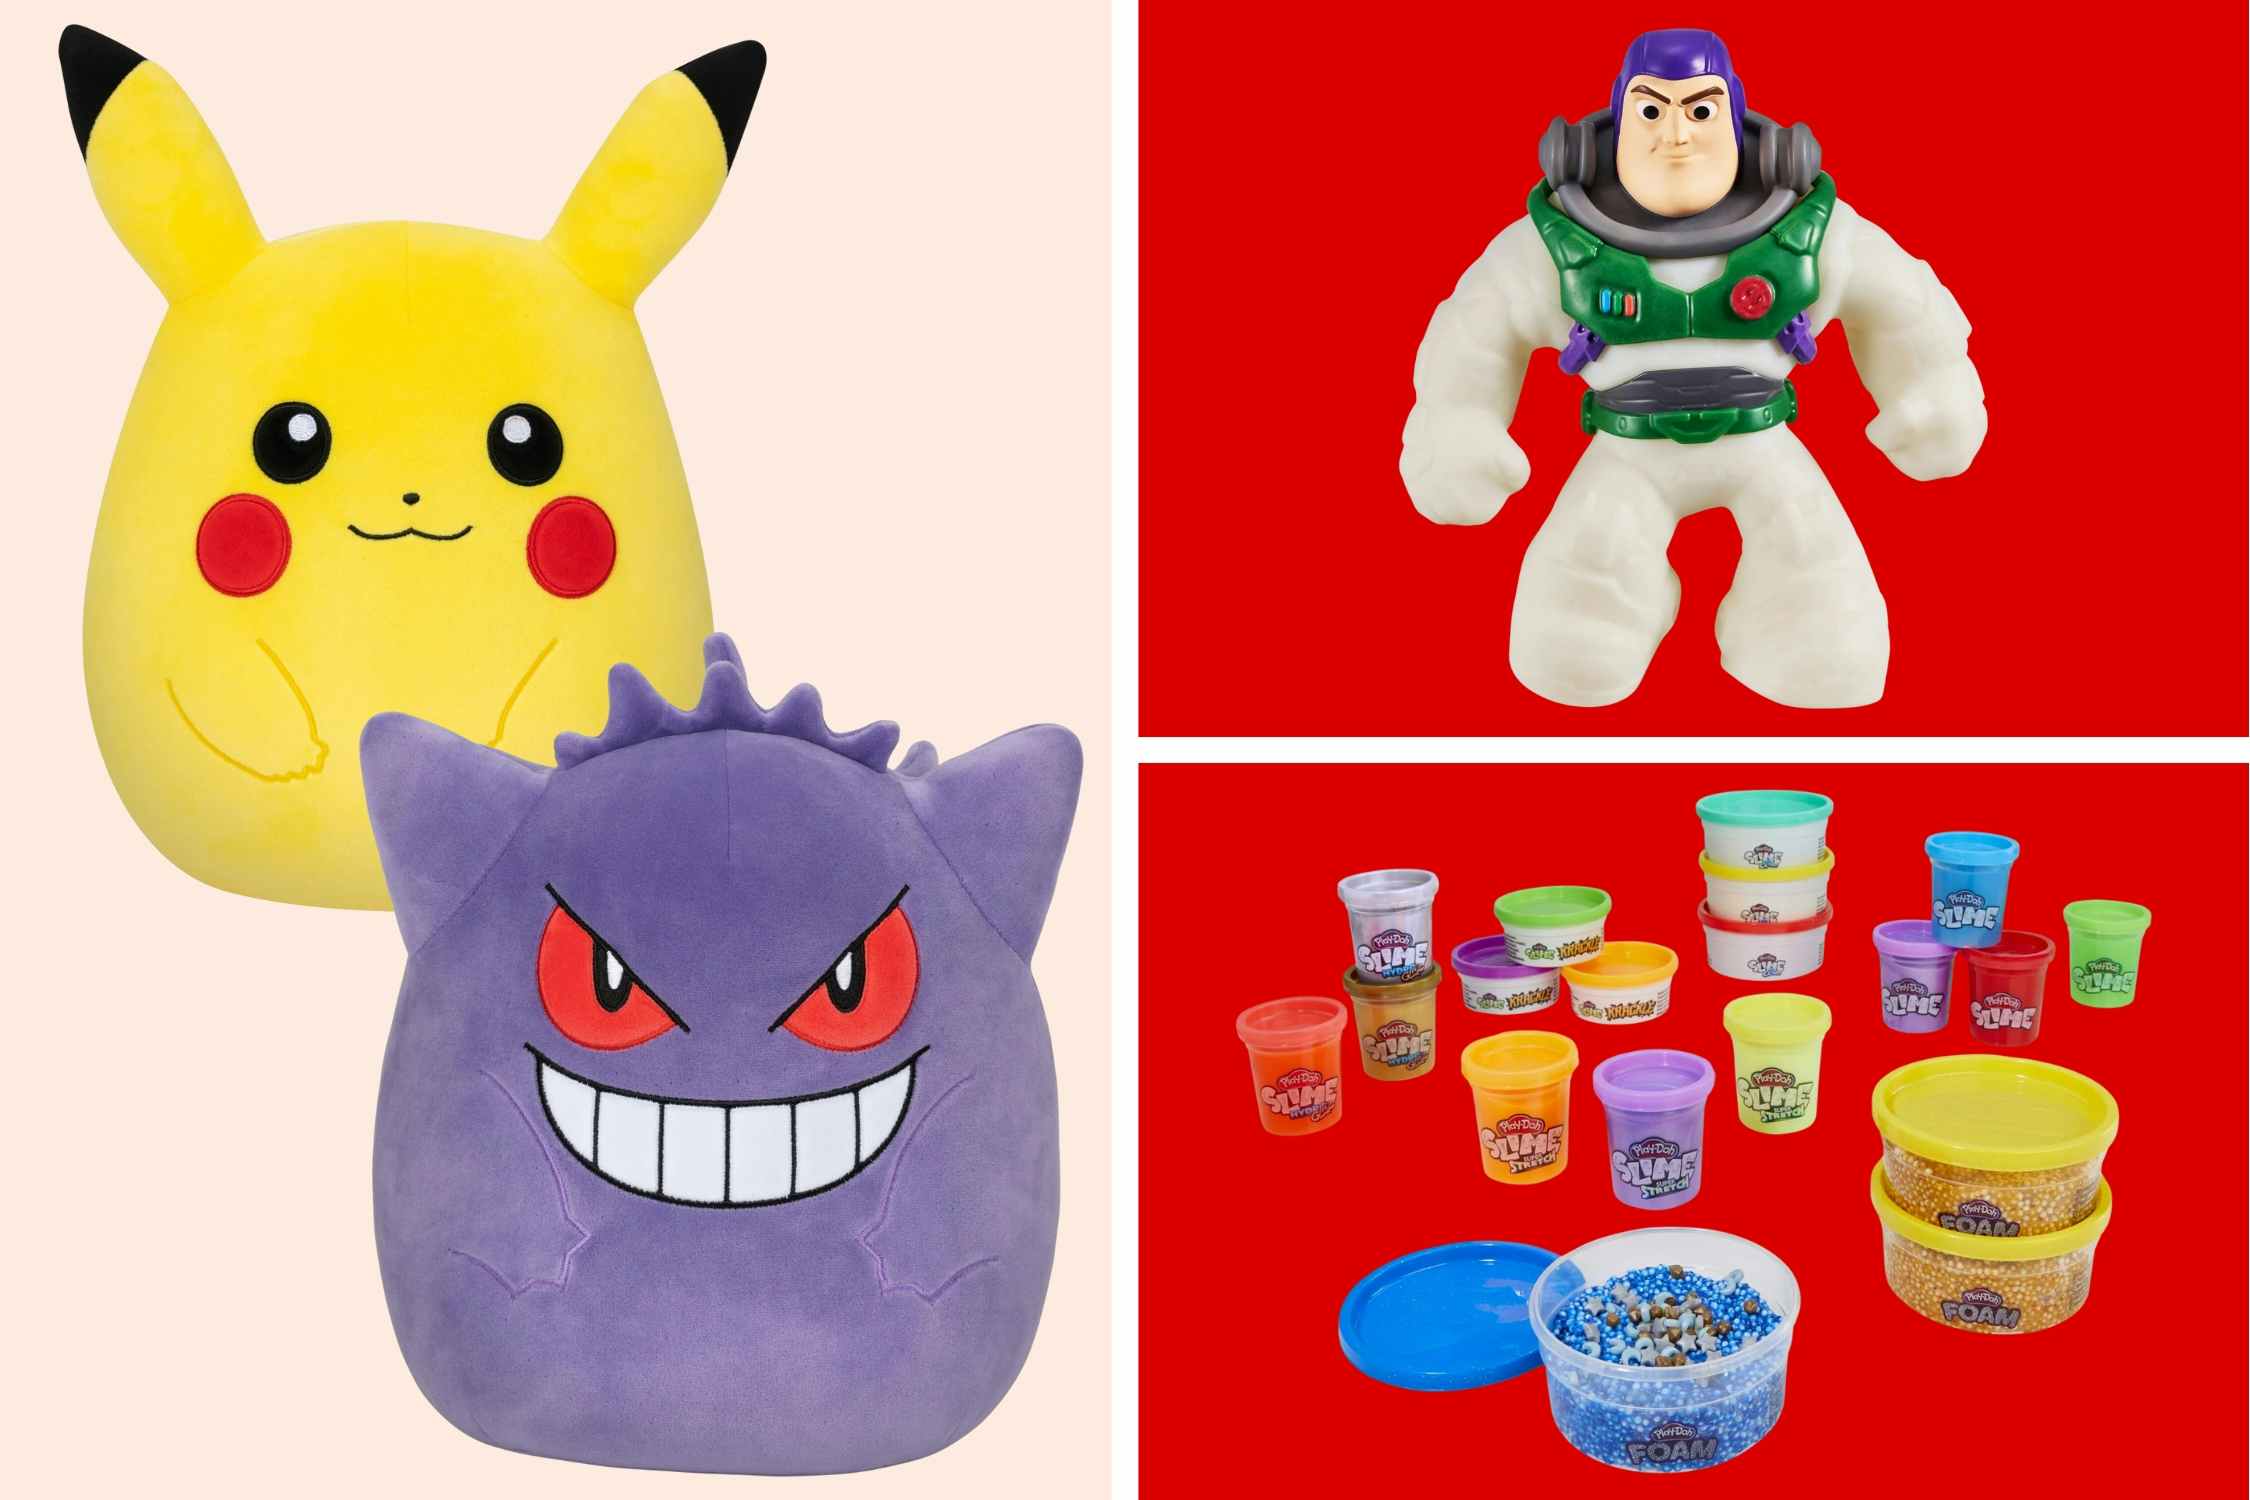 Walmart.com Toy Deals: $5 Play-Doh, $6 Buzz Lightyear, More (Updated Daily)